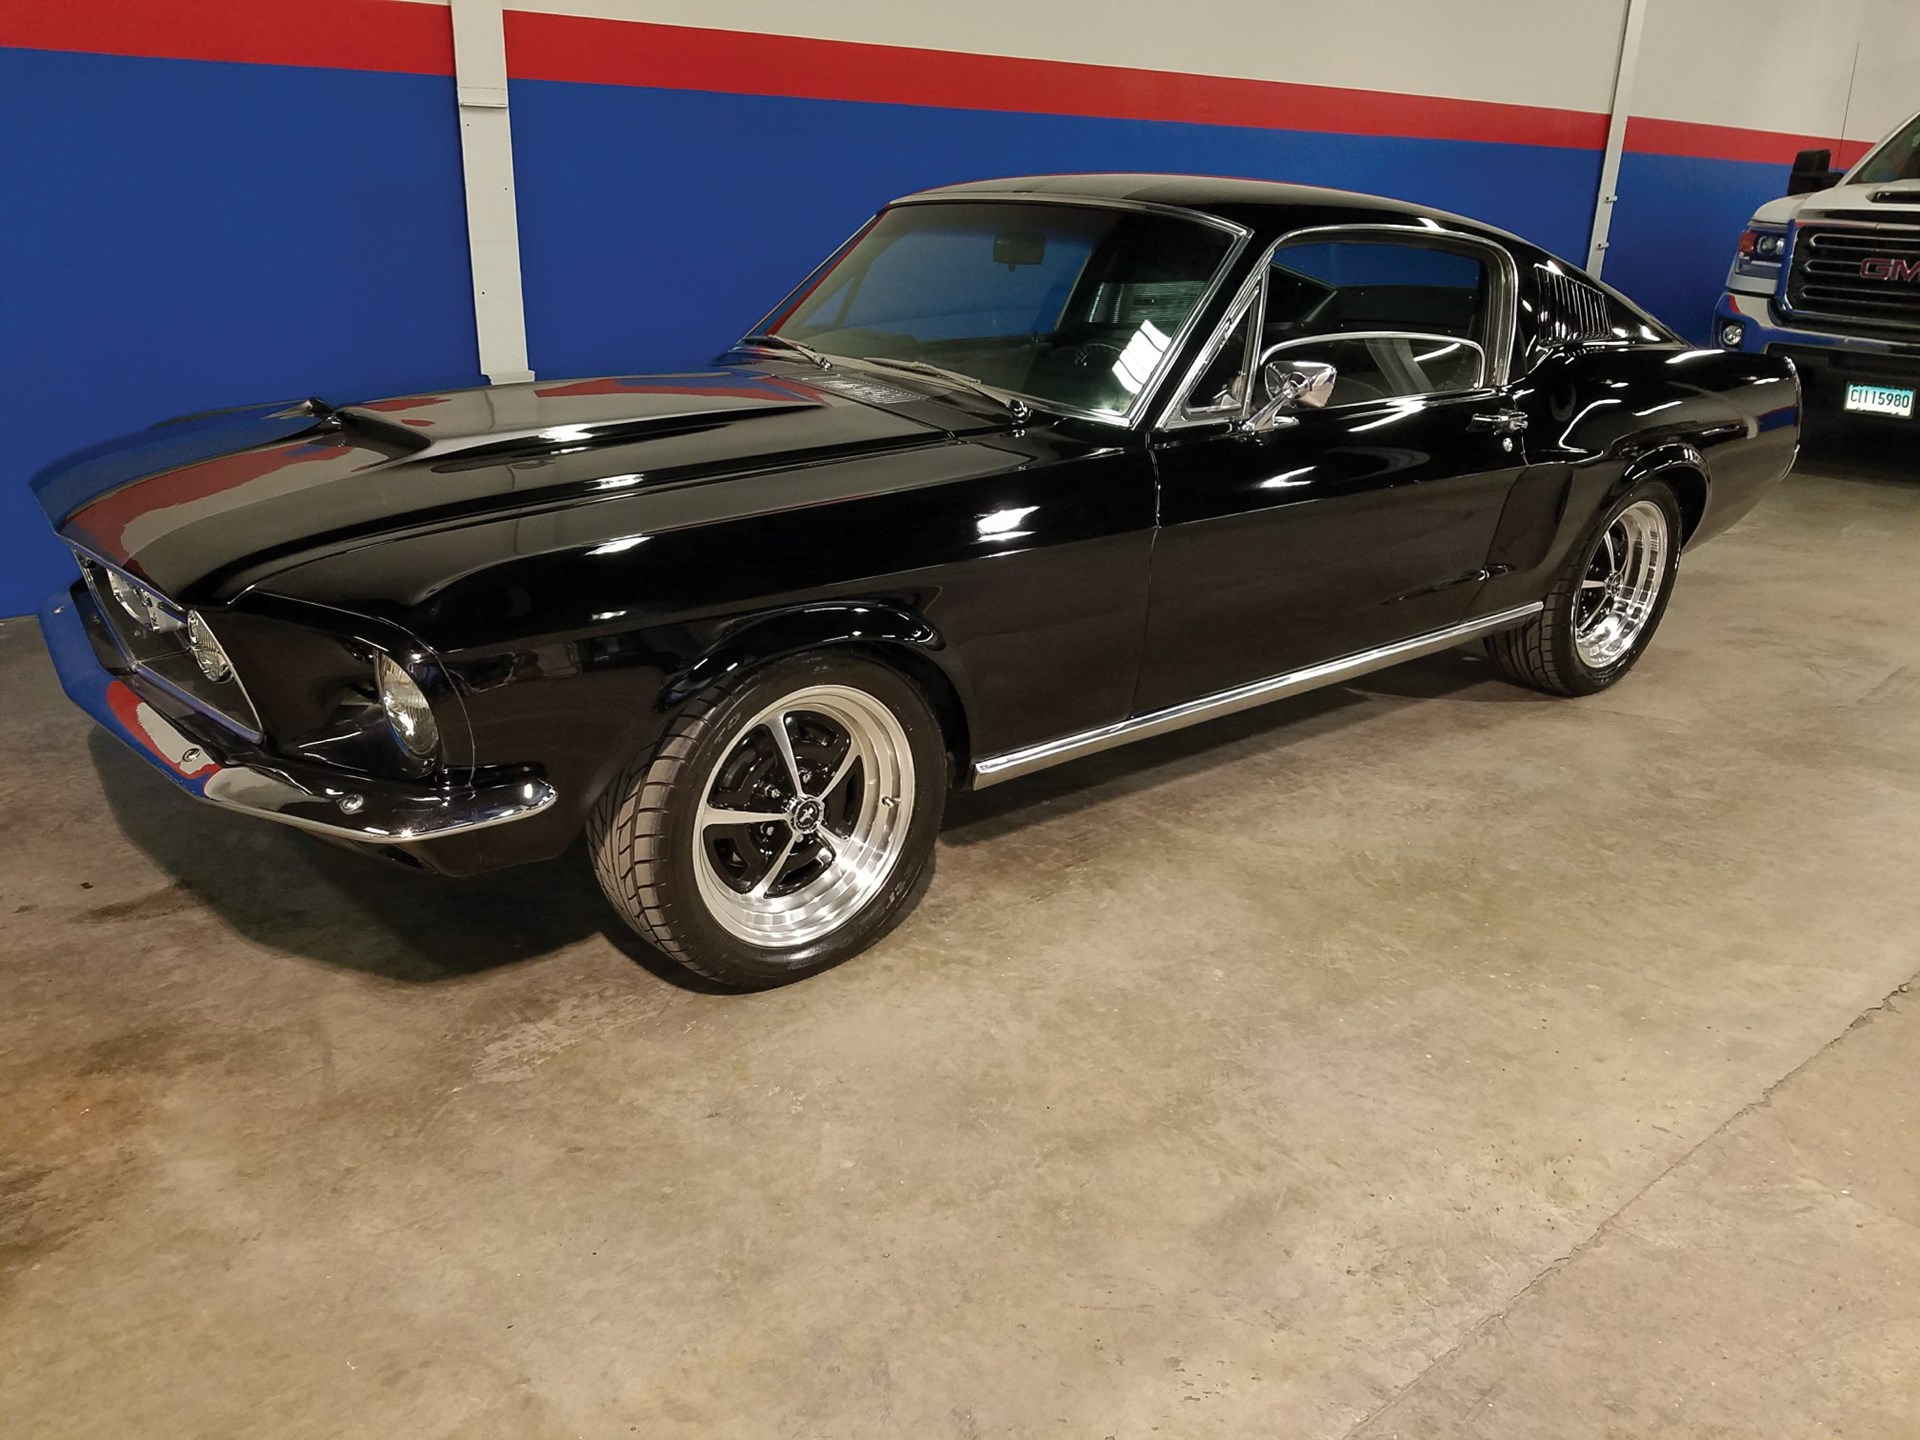 RM Sotheby's - 1967 Ford Mustang Fastback | Auburn Fall 2018